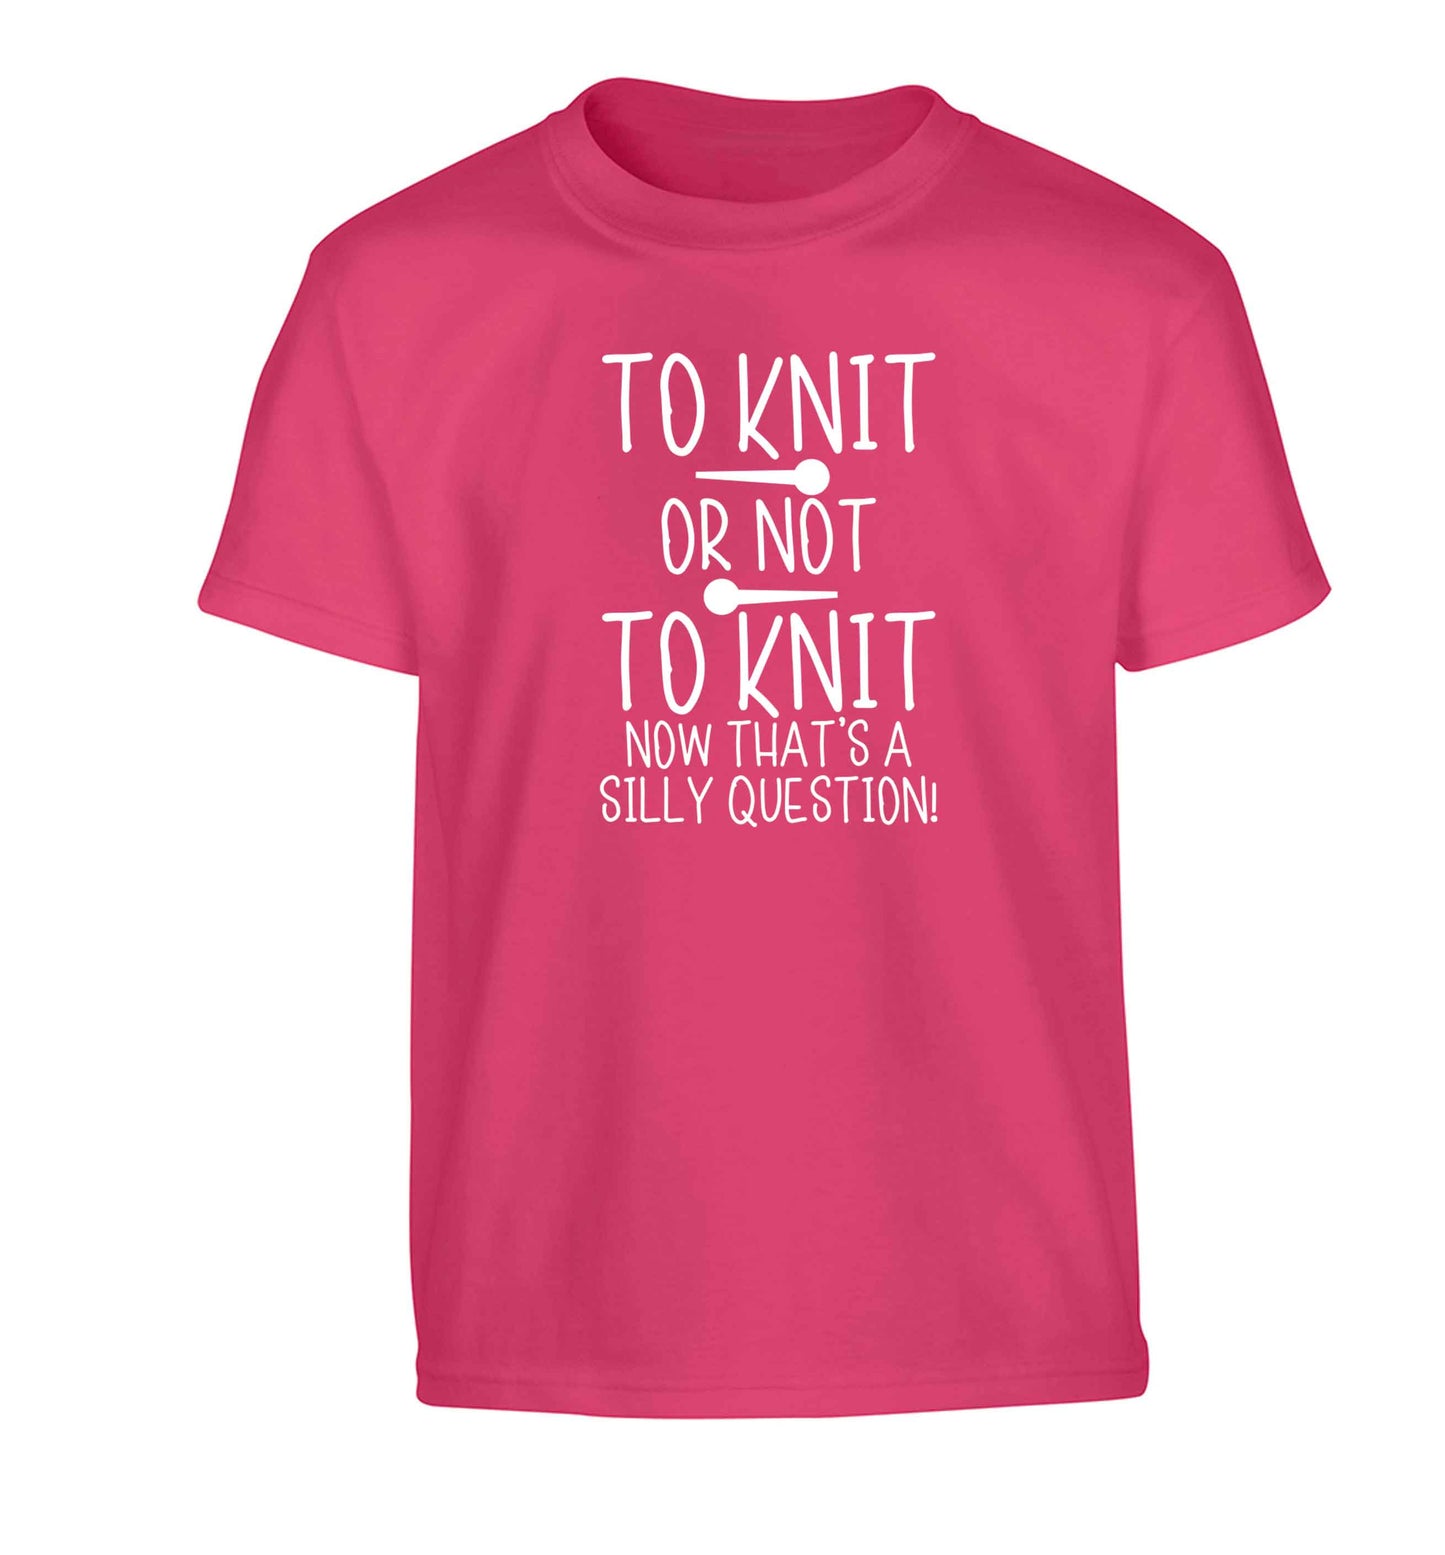 To knit or not to knit now that's a silly question Children's pink Tshirt 12-13 Years